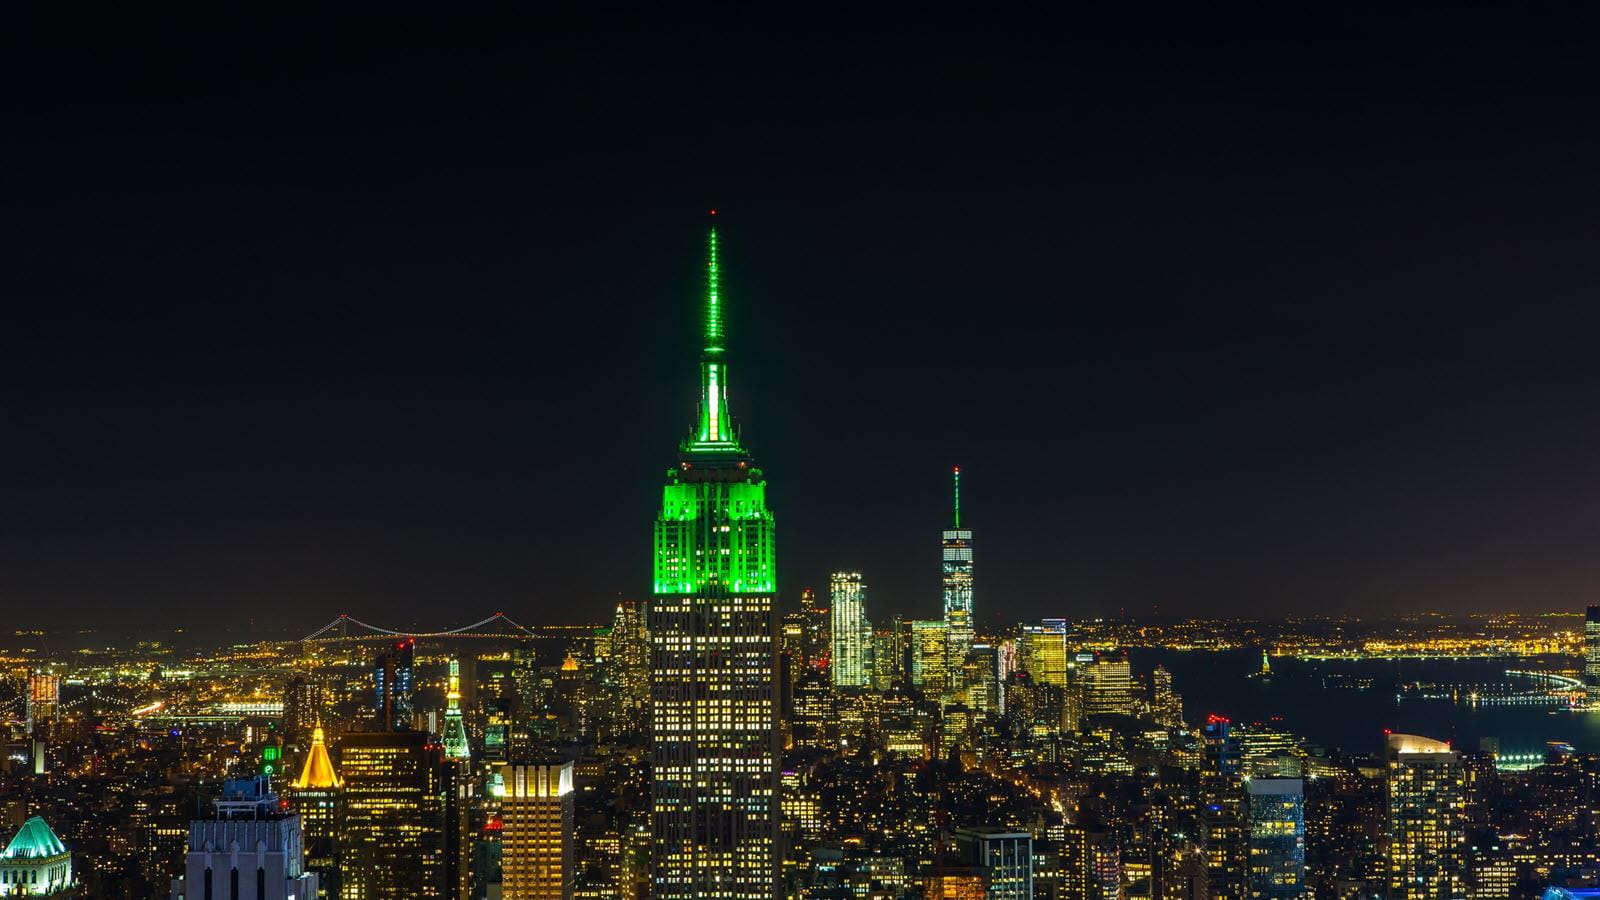 New York's Empire State Building at night lit up in green